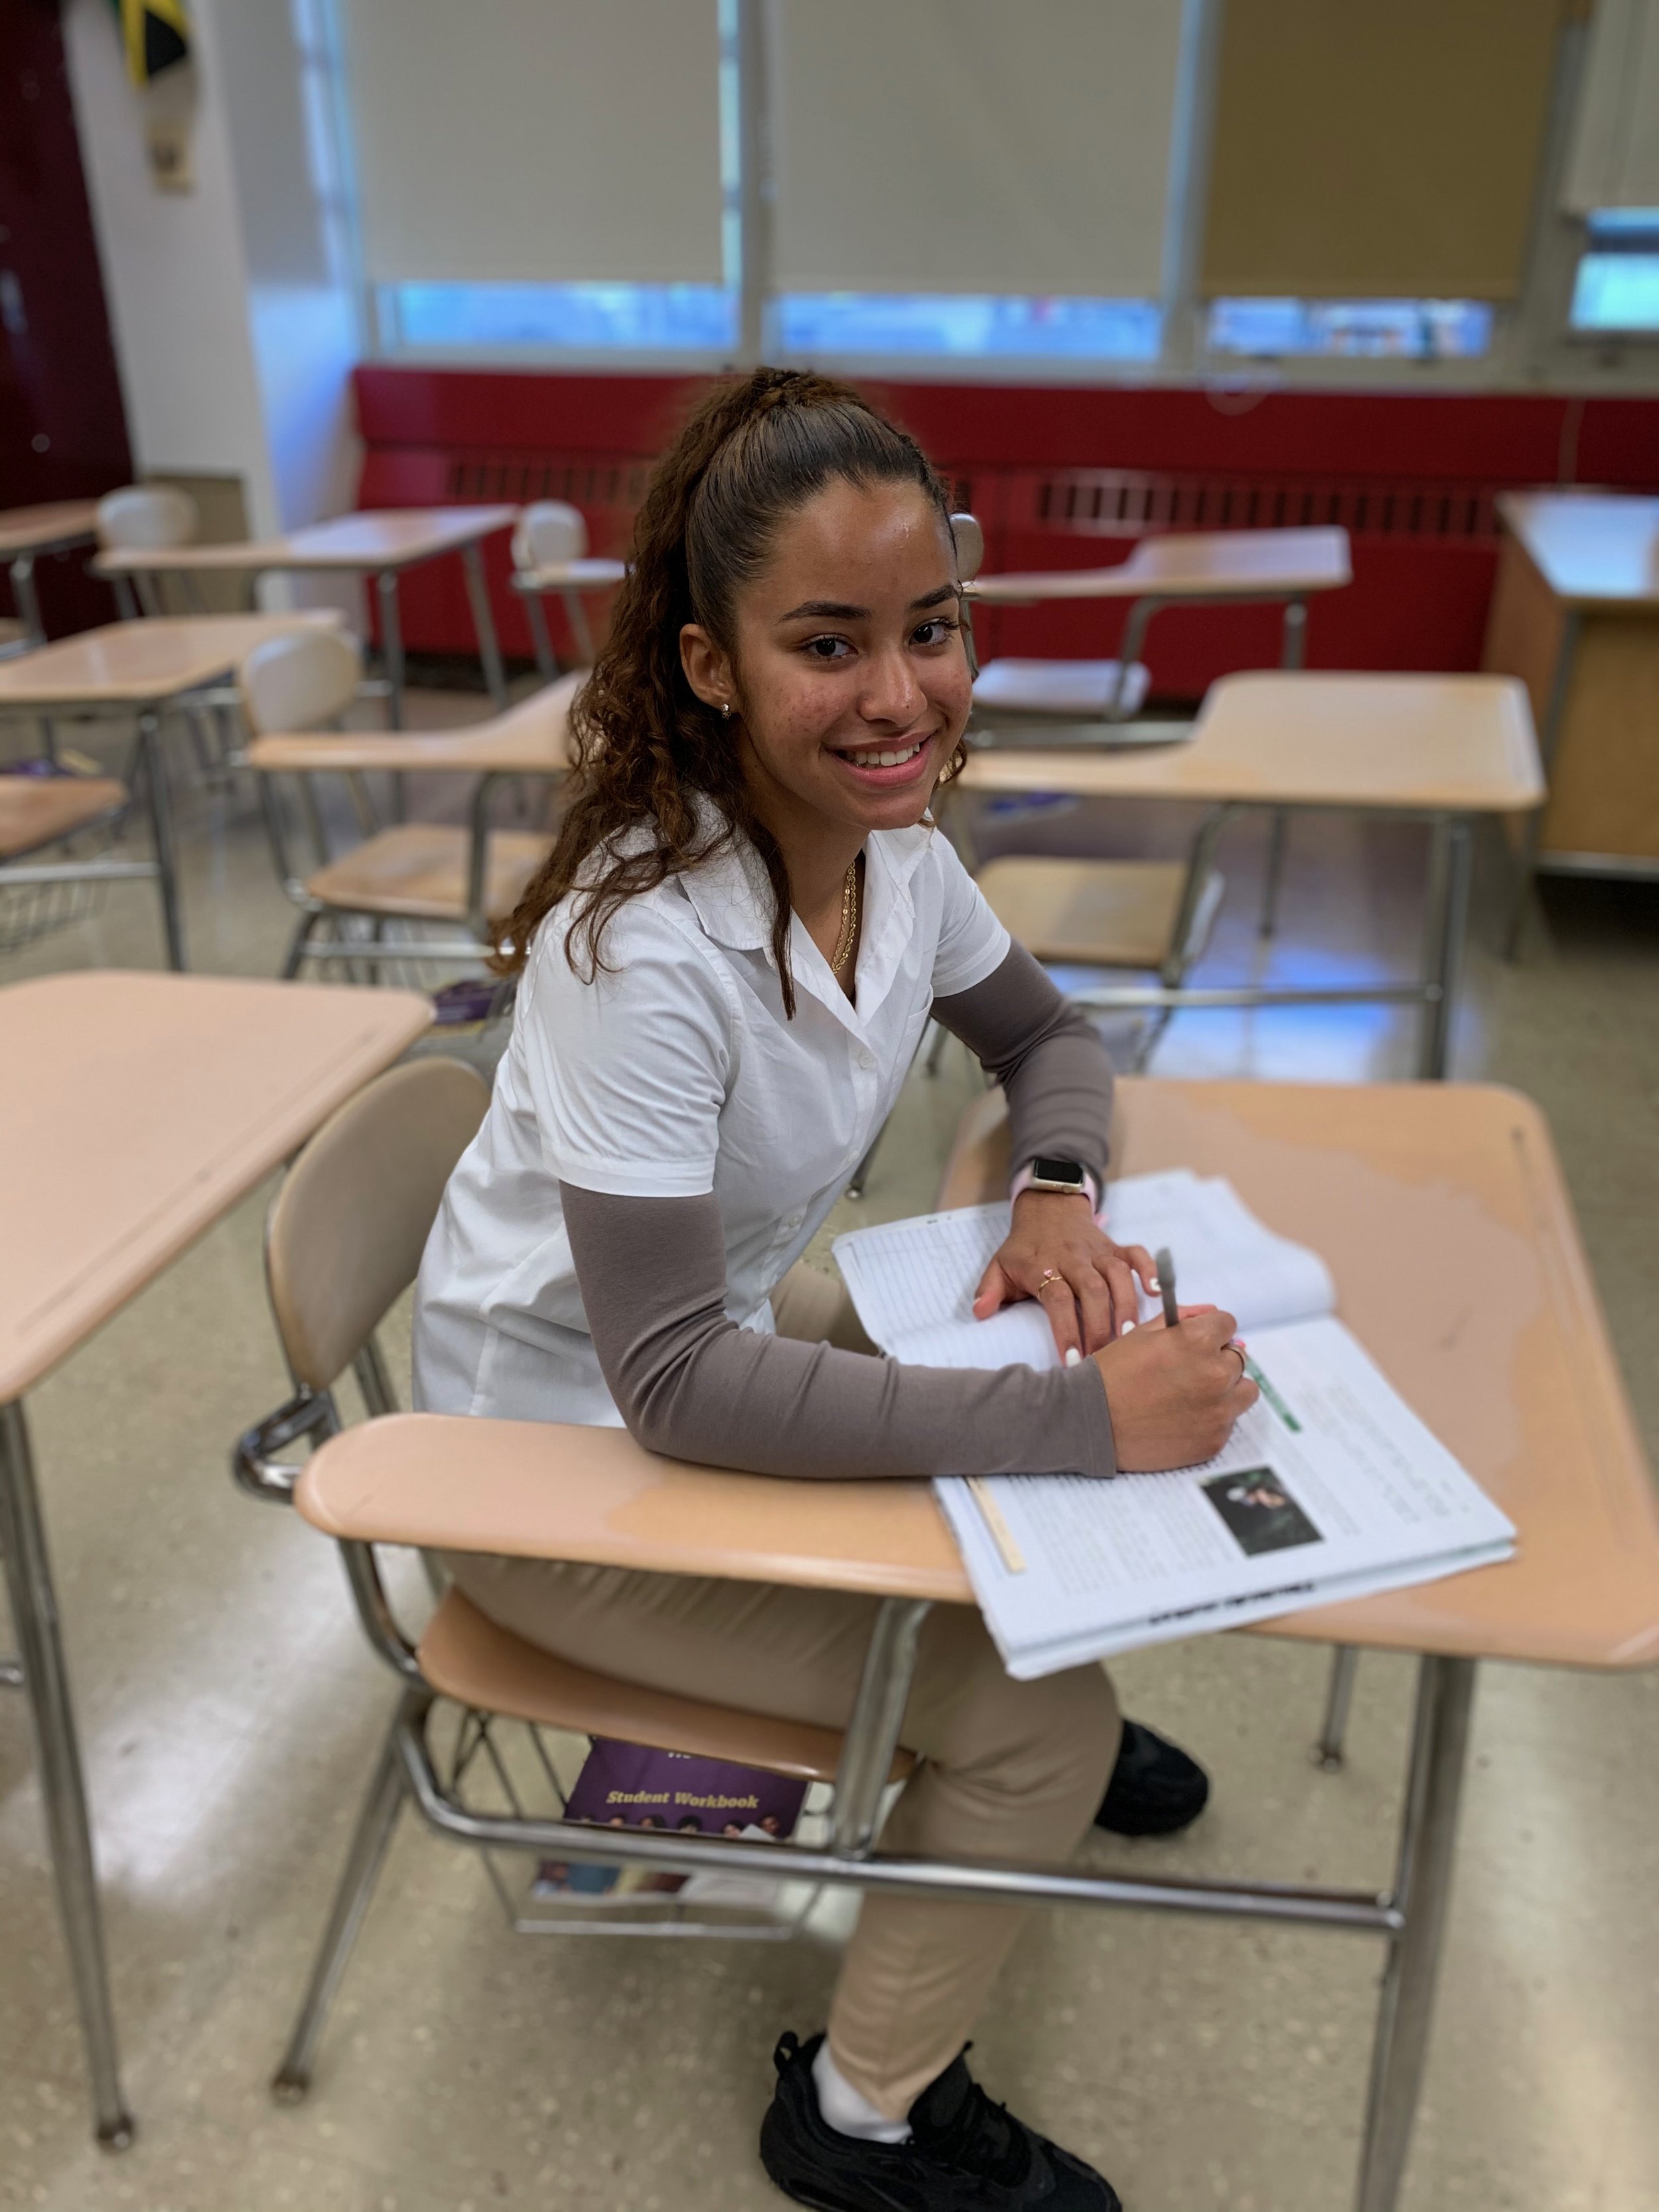  Briana Fernandez is now a sophomore at SUNY Albany. She is known at Harlem Lacrosse for her infectious attitude and perseverance, earning her a scholarship from the Will Barrow Leadership Scholarship Committee.  